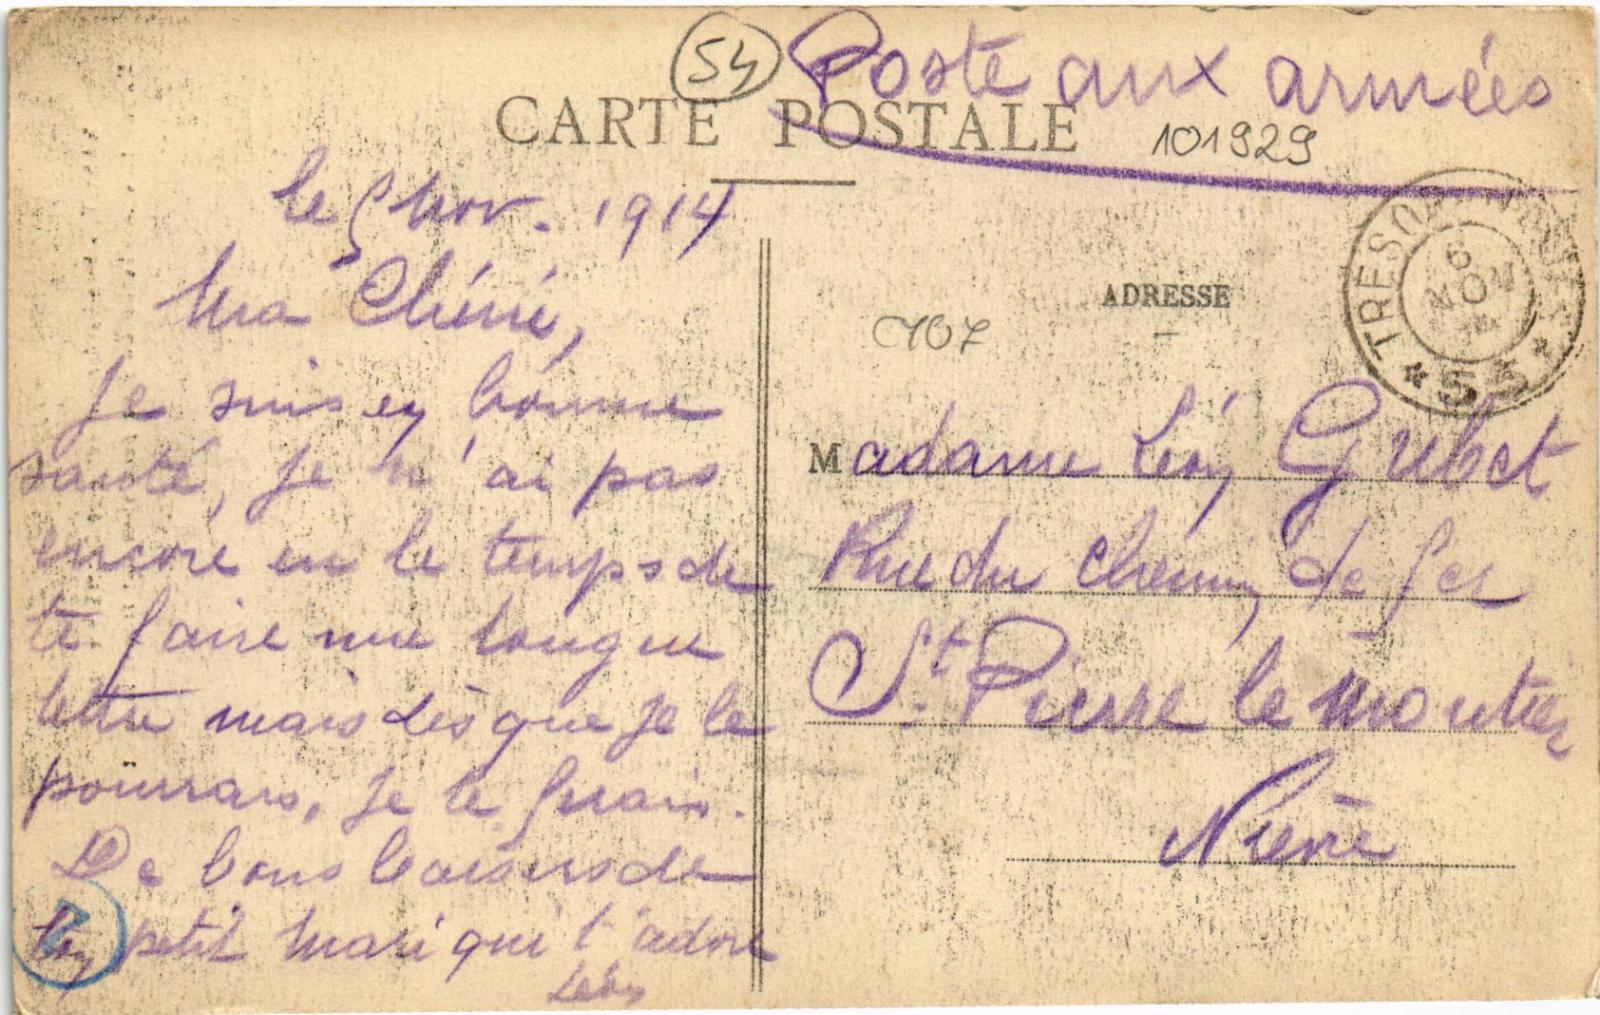 CPA NANCY Bombardement MEURTHE et MOSELLE (101929) 2